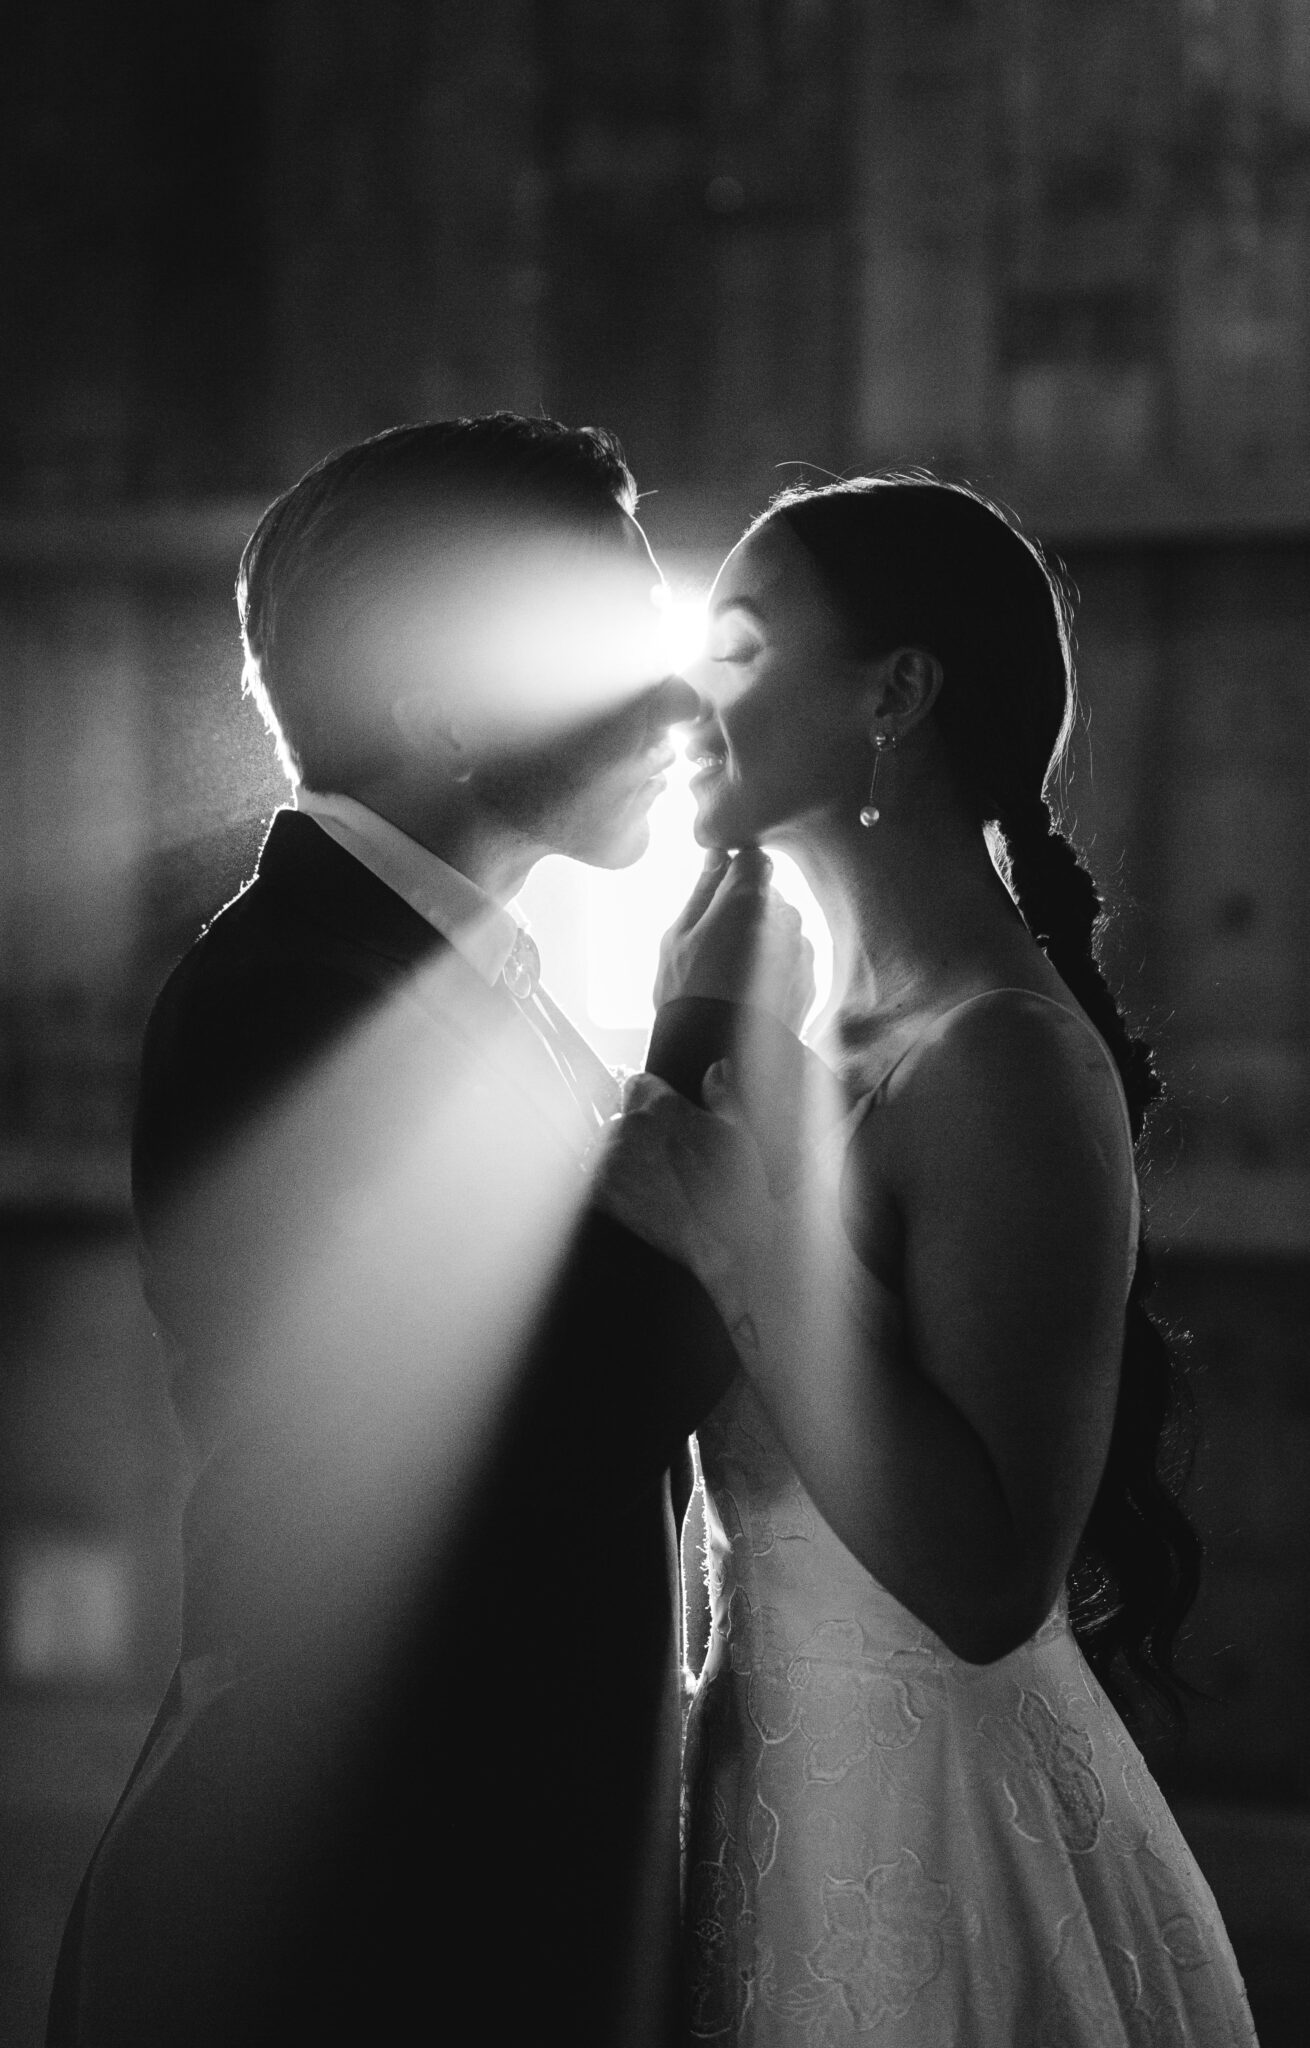 Vintage meets Contemporary Wedding Inspiration: black and white photography of bride and groom first kiss with light shining through, creative kiss photograph, creative professional wedding photography, bride and groom wedding portrait